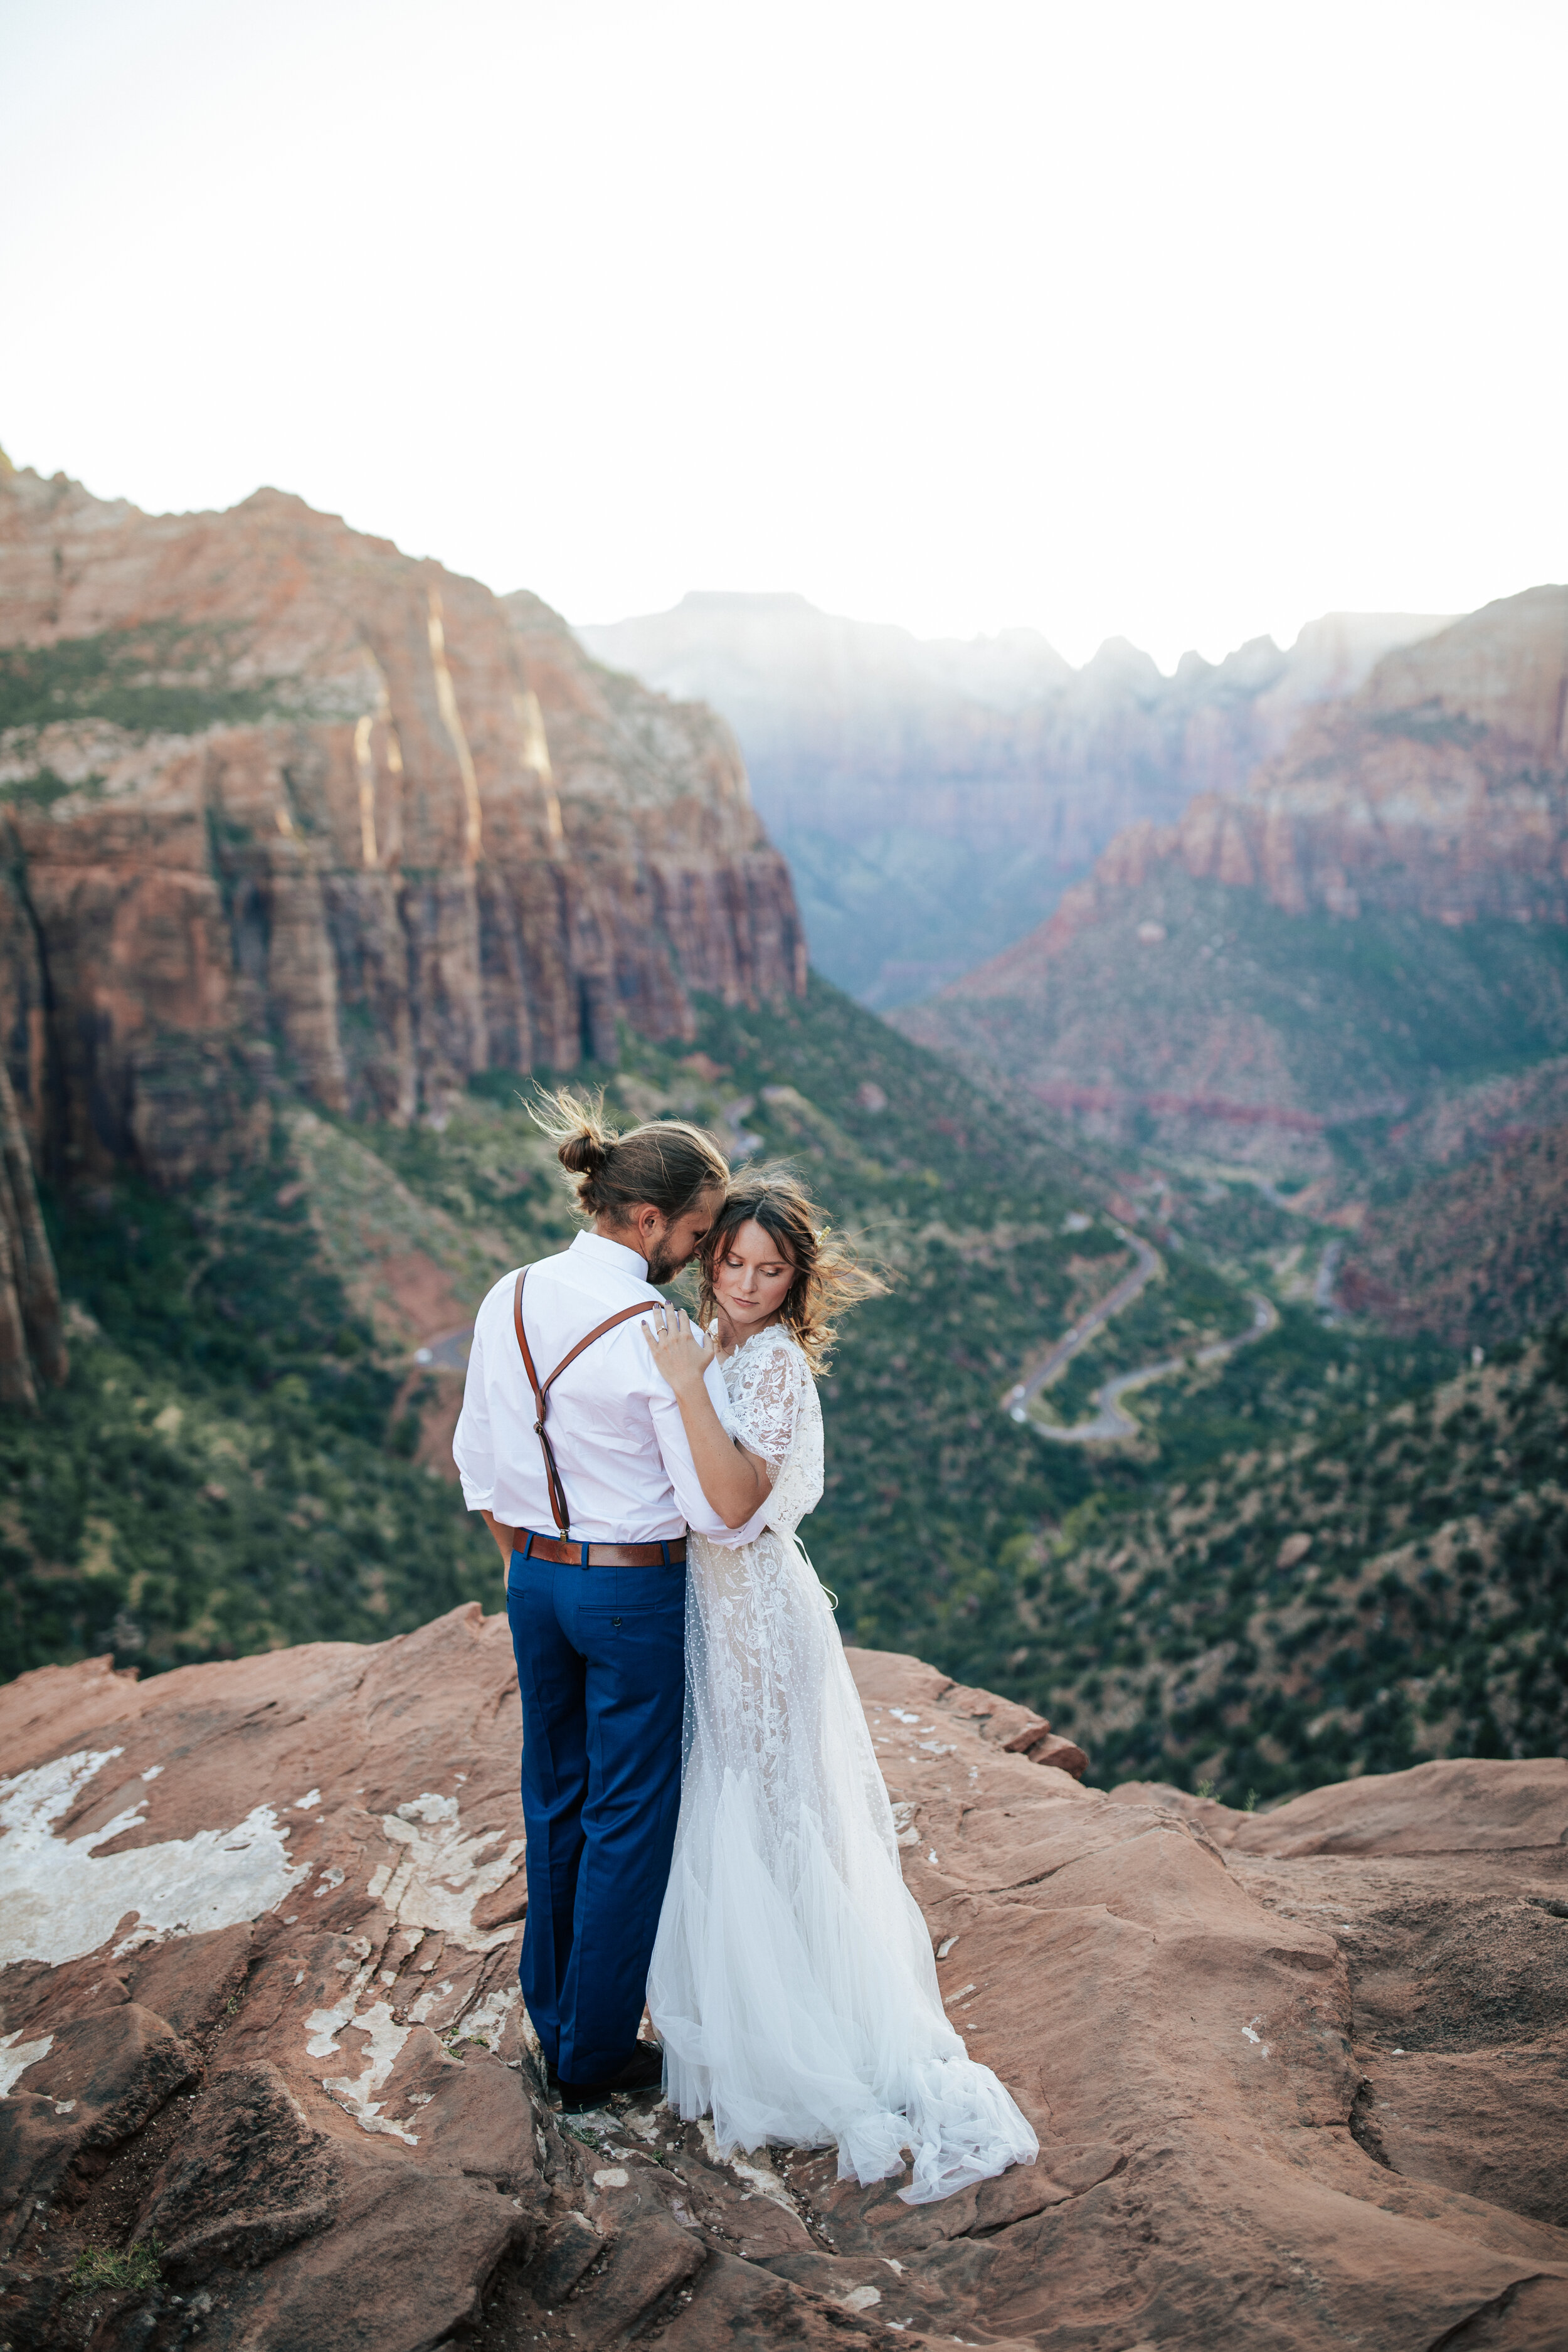  A beautiful couple dance together on the cliffs of Zion National Park in an elopement styled photo shoot by Emily Jenkins Photography. Wedding picture location inspiration ideas and goals couple goals wedding goals bridal wedding dress inspiration i